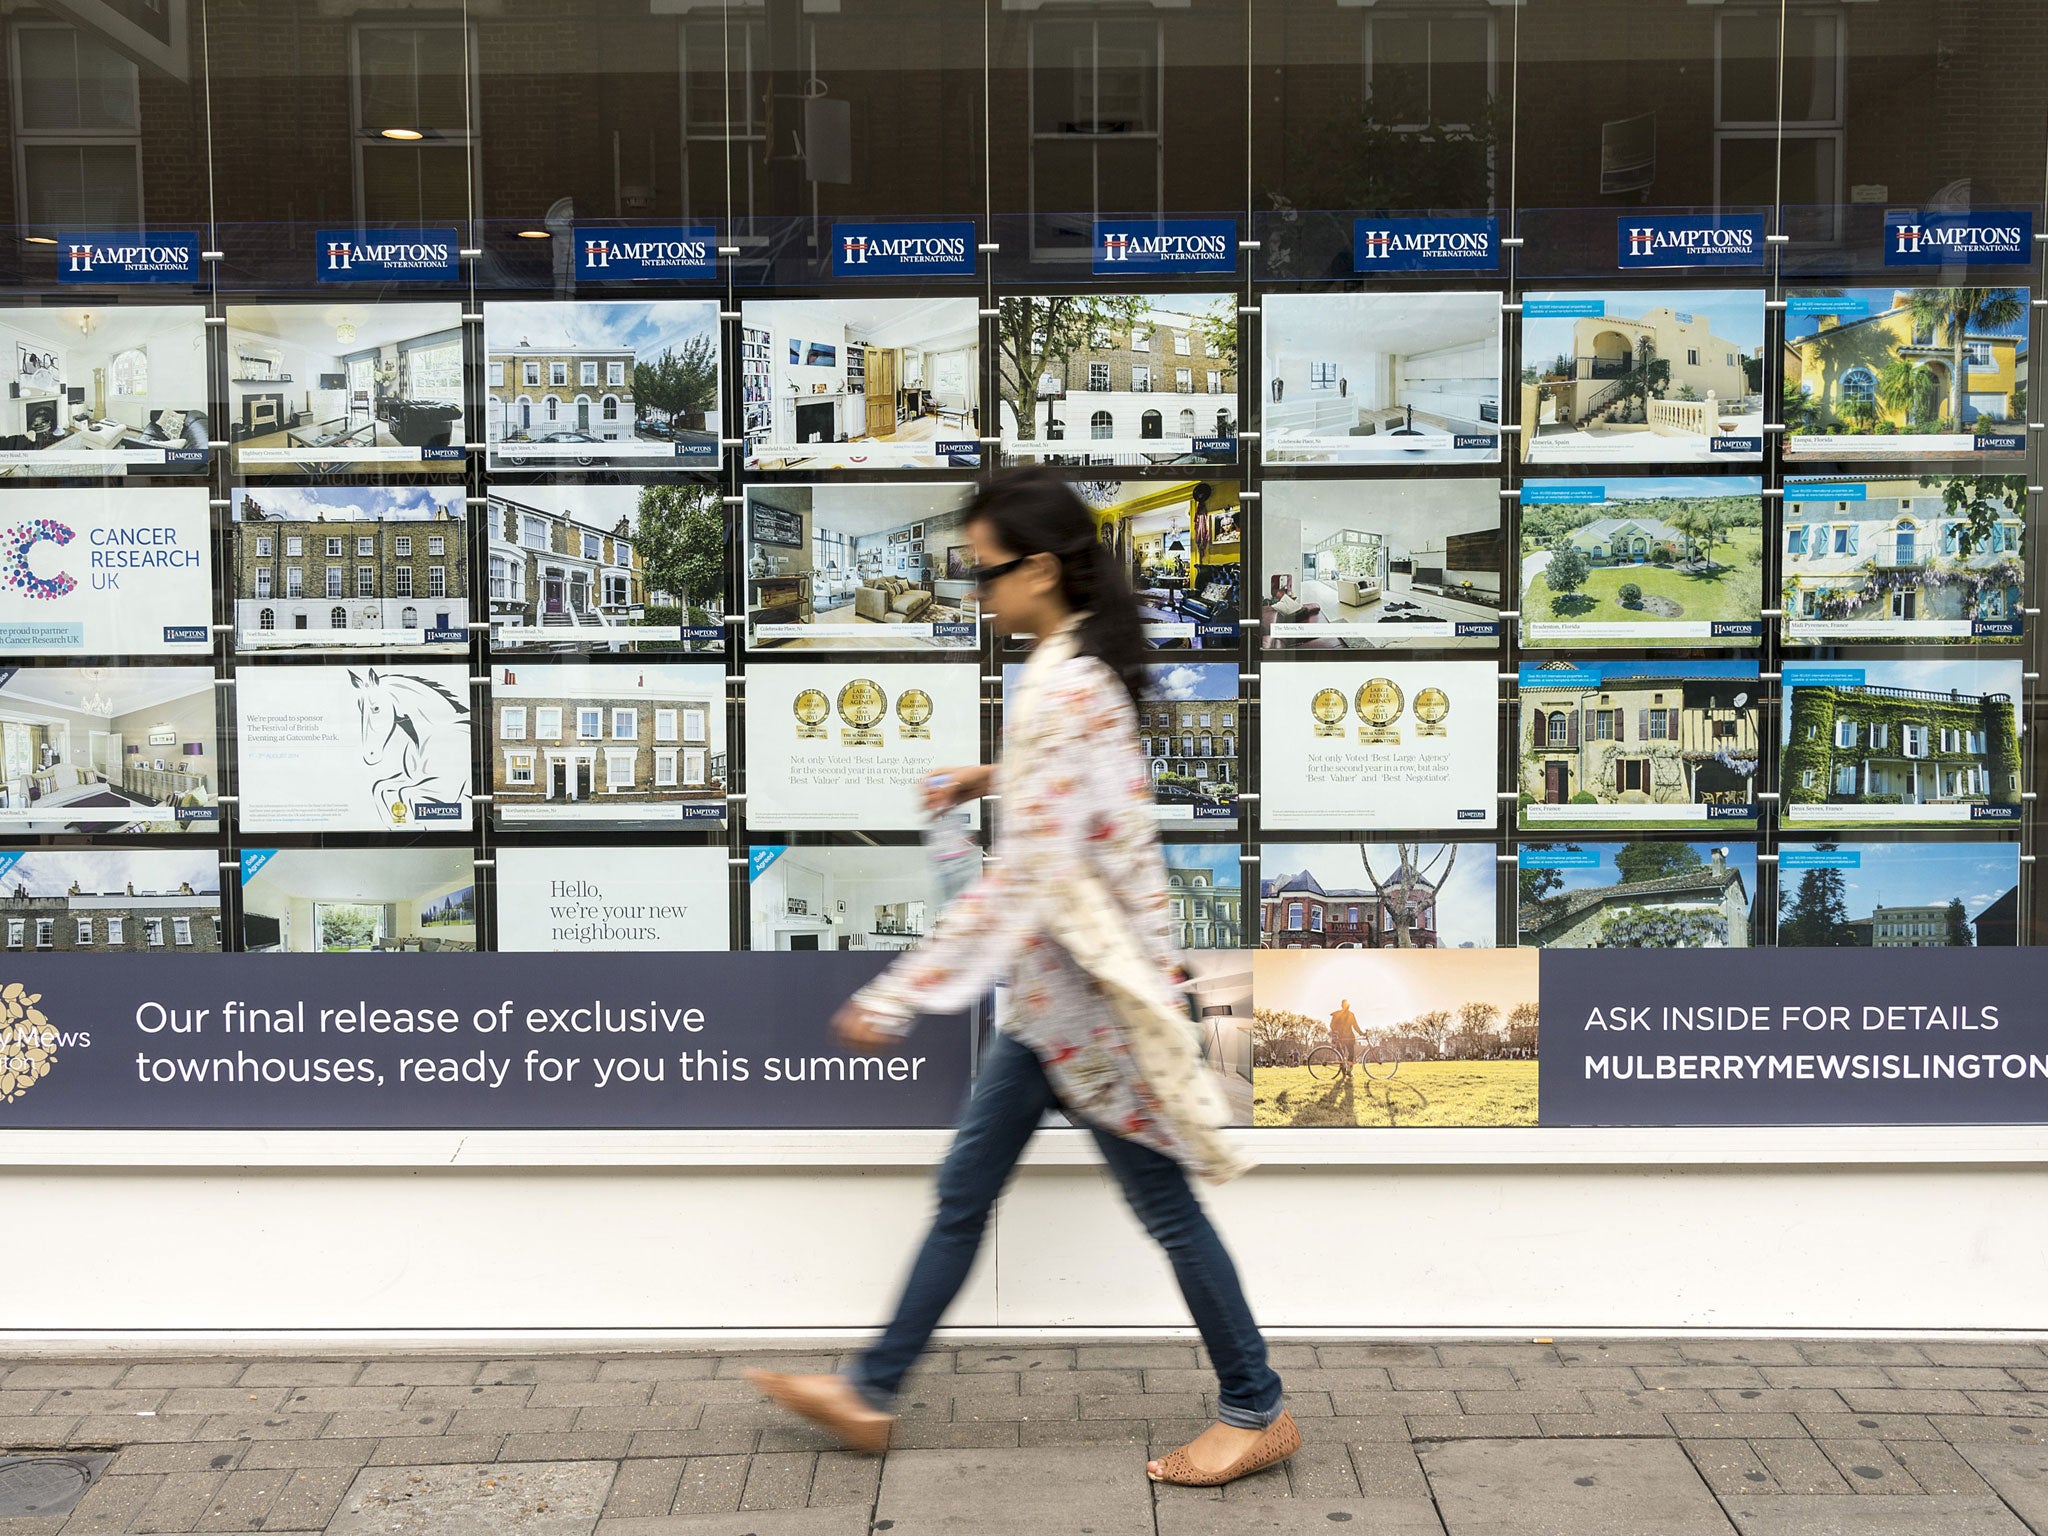 Previously, a 5 per cent deposit would have been required from a buyer of a new property